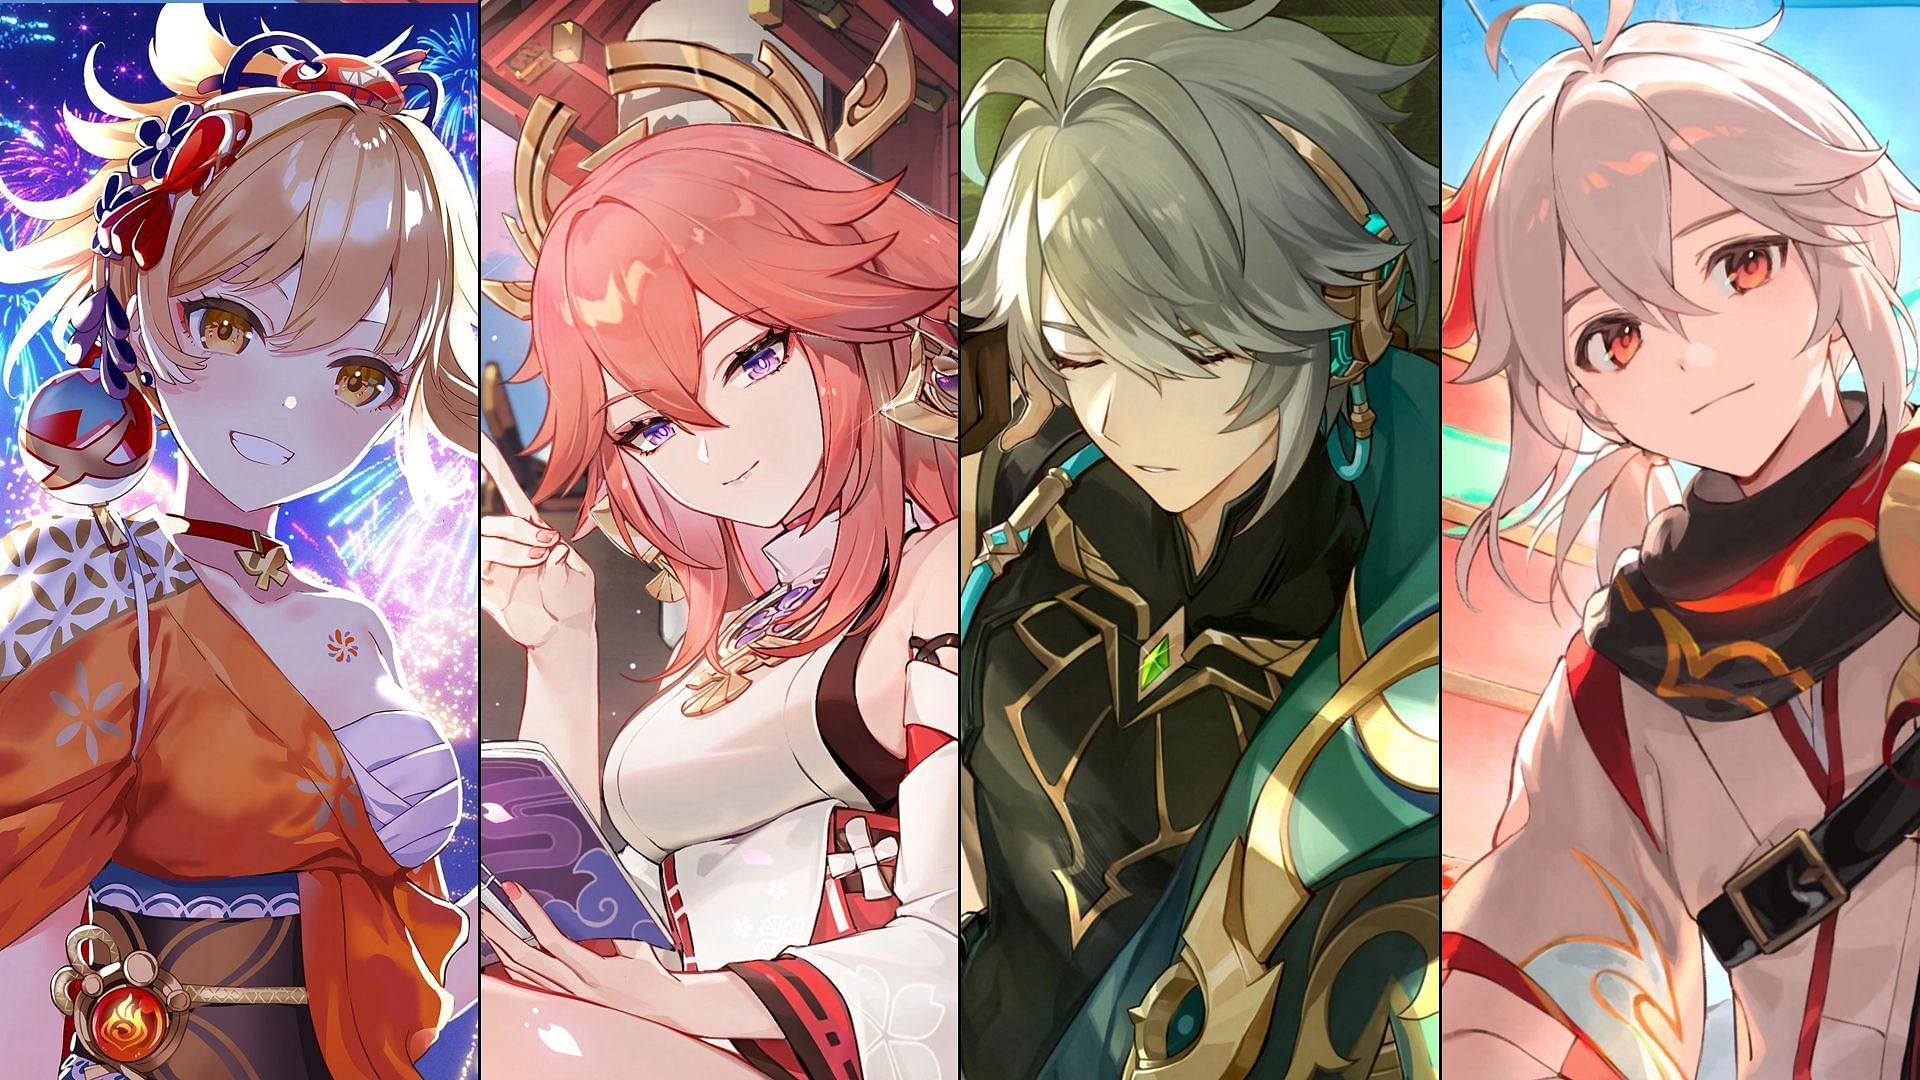 The rumored 5-stars who will have a rerun in the next update